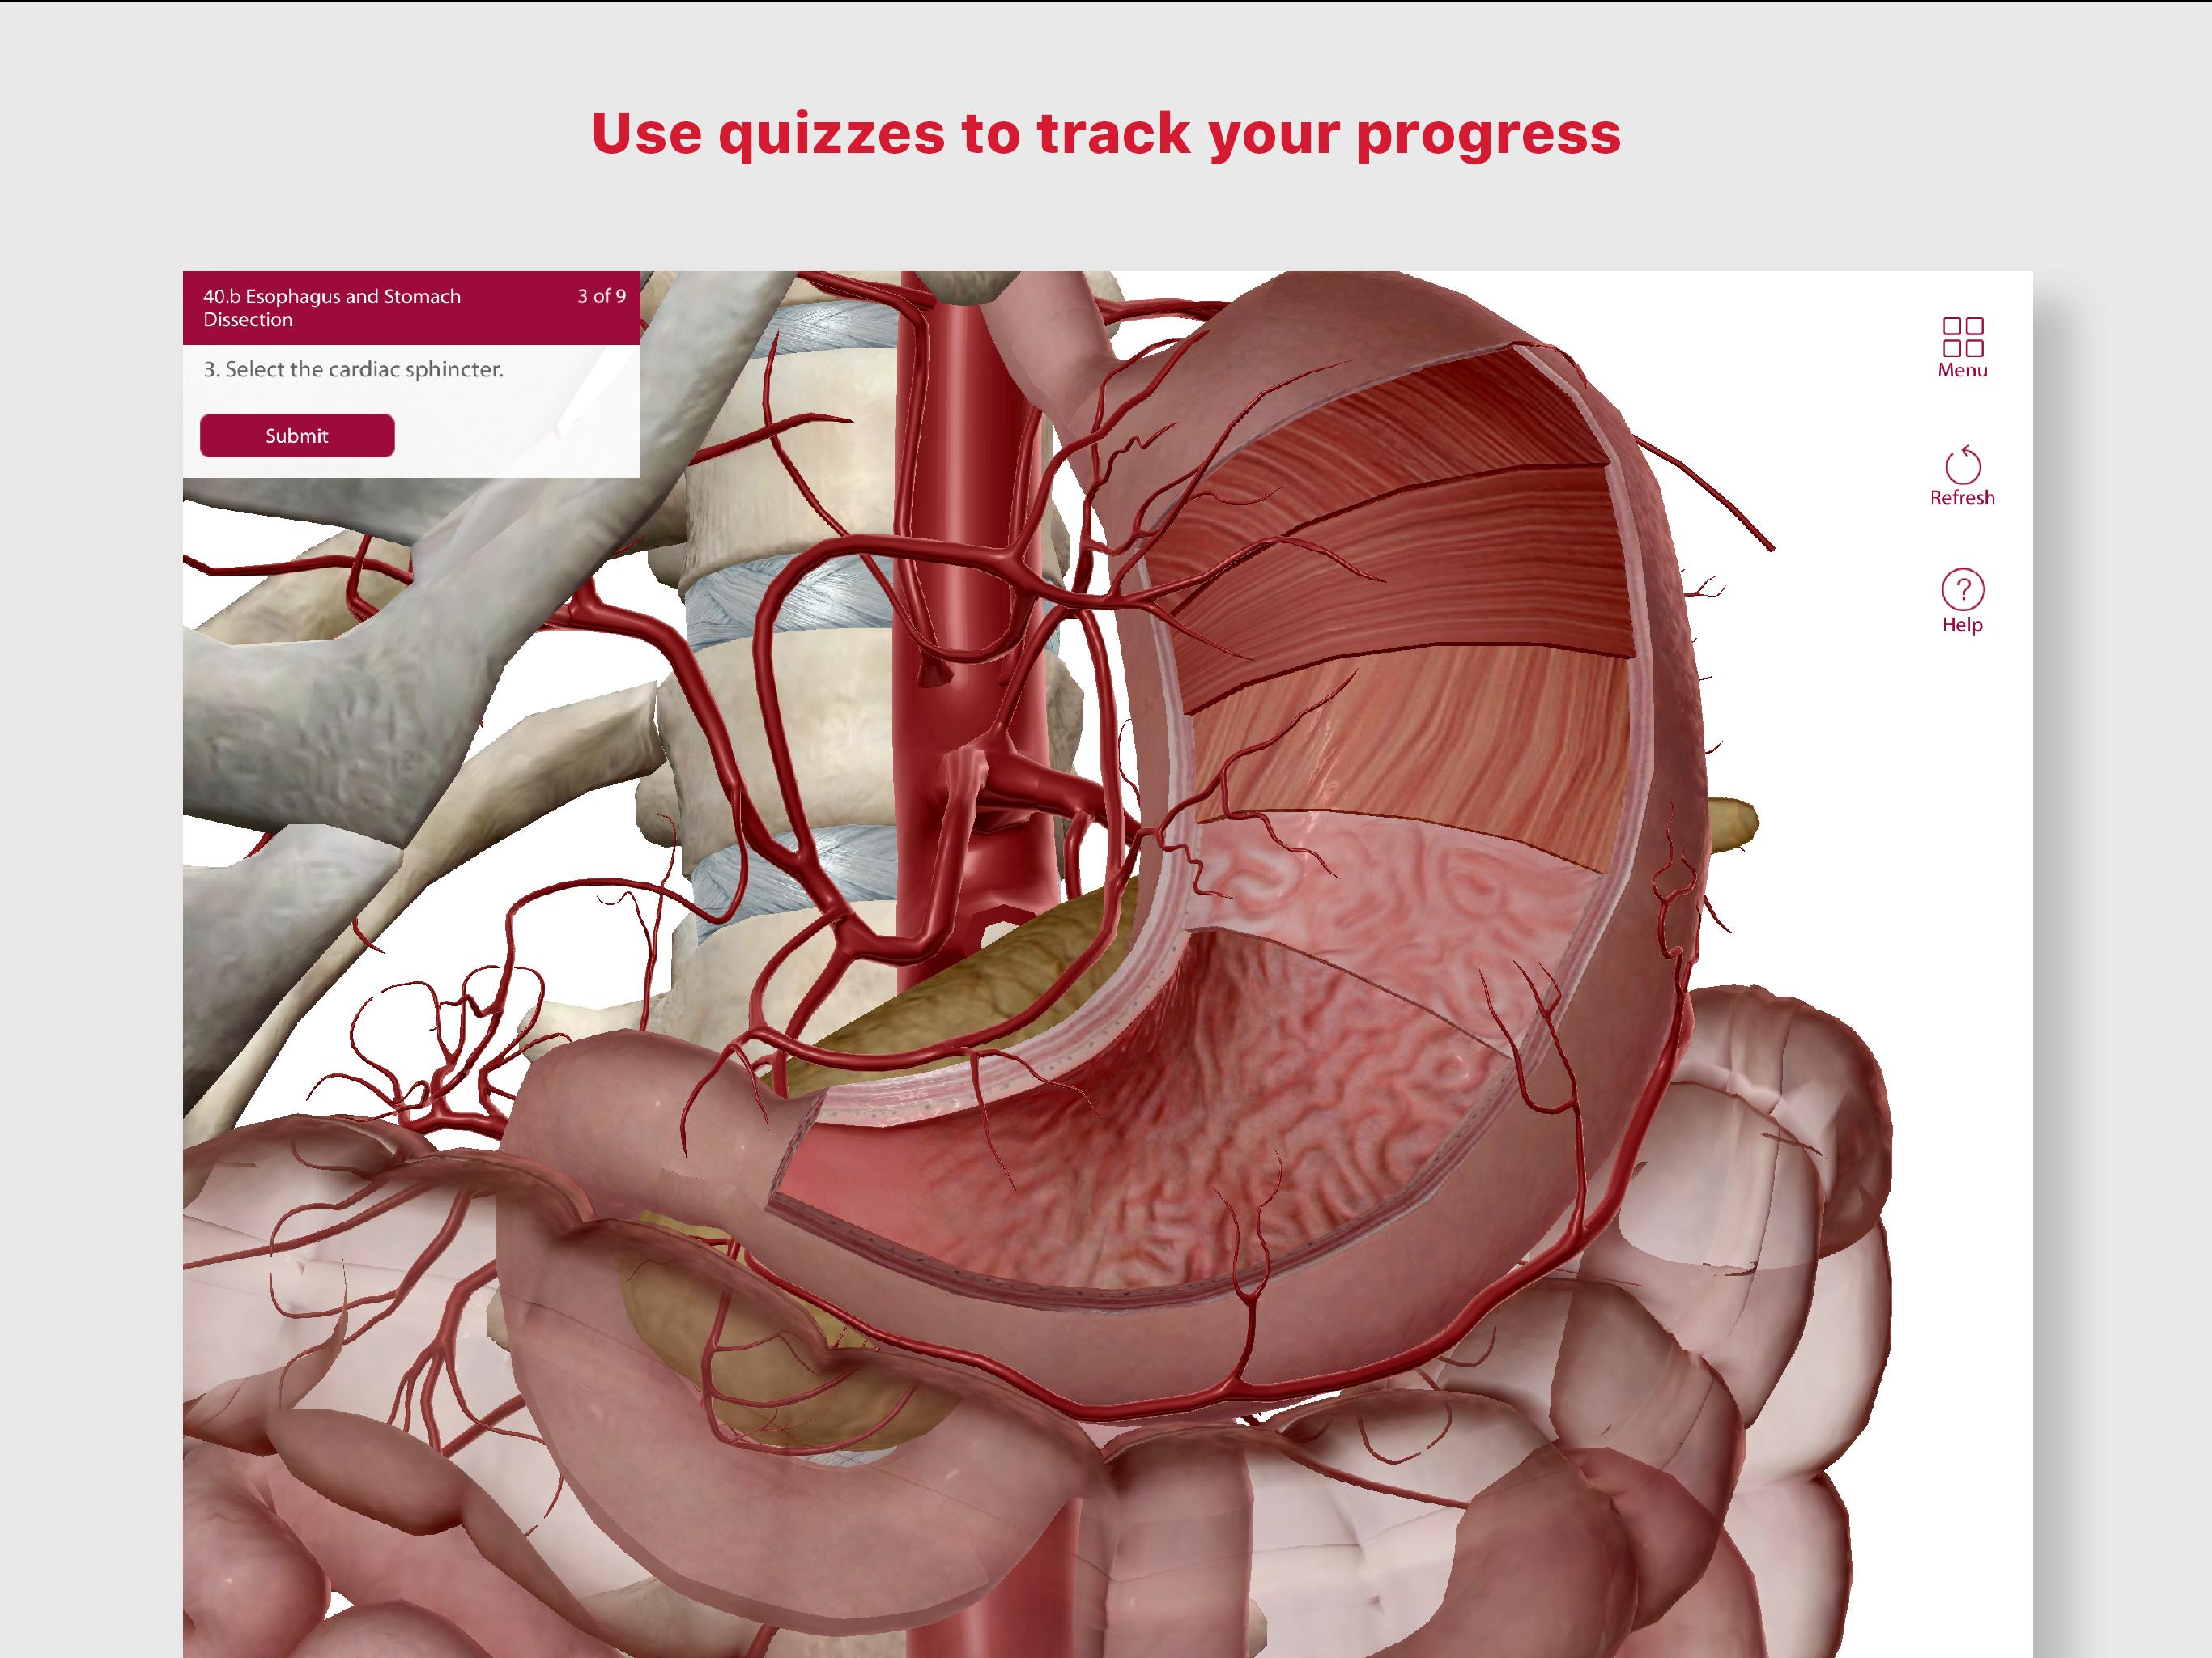 Anatomy & Physiology for Android - APK Download